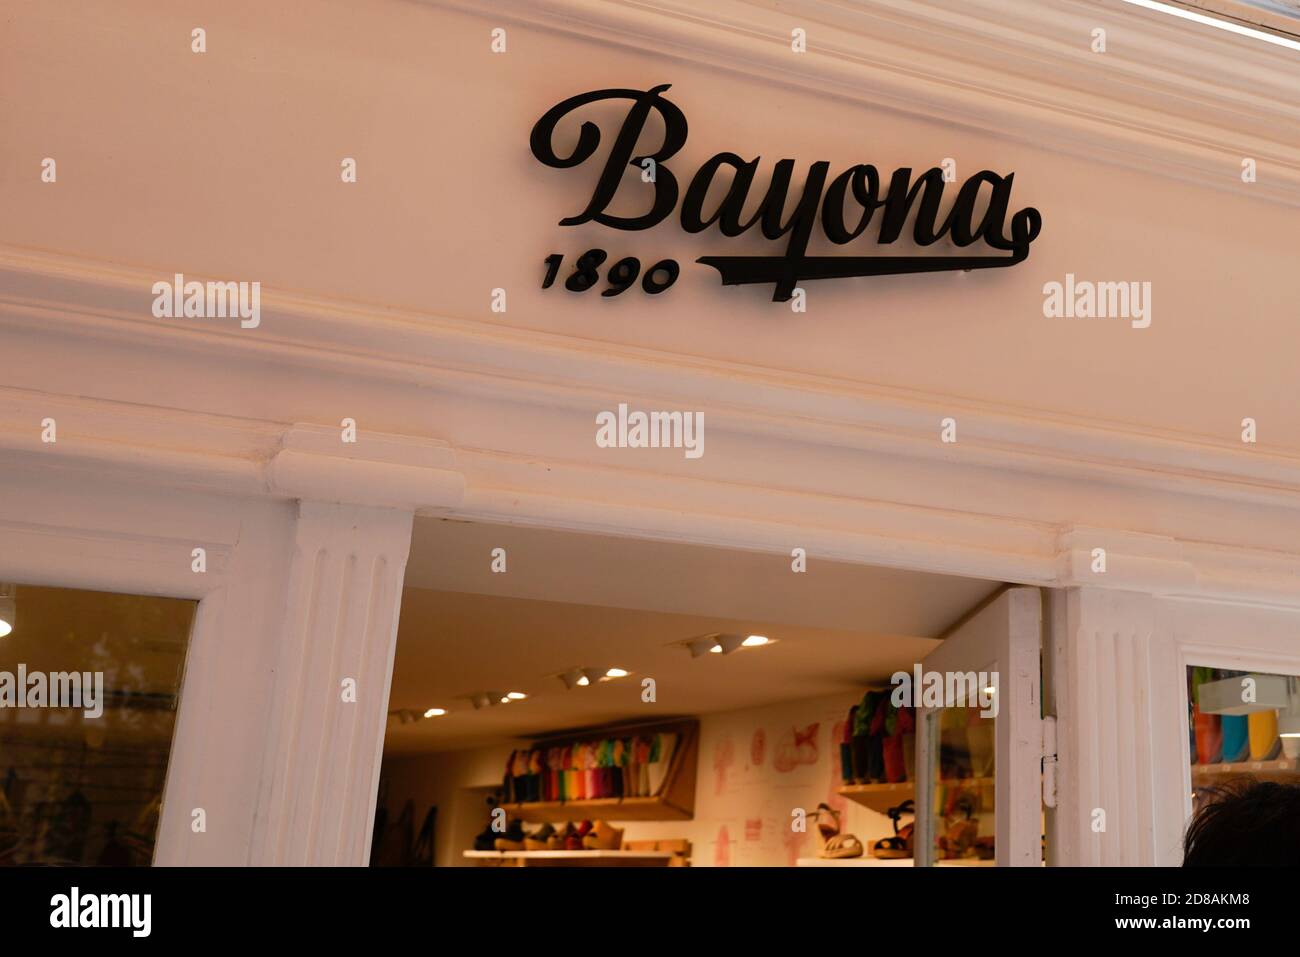 Saint-Jean-de-Luz , Aquitaine / France - 10 20 2020 : bayona 1890 logo and  sign of store manufacture of hand-stitched and braided espadrilles shop in  Stock Photo - Alamy